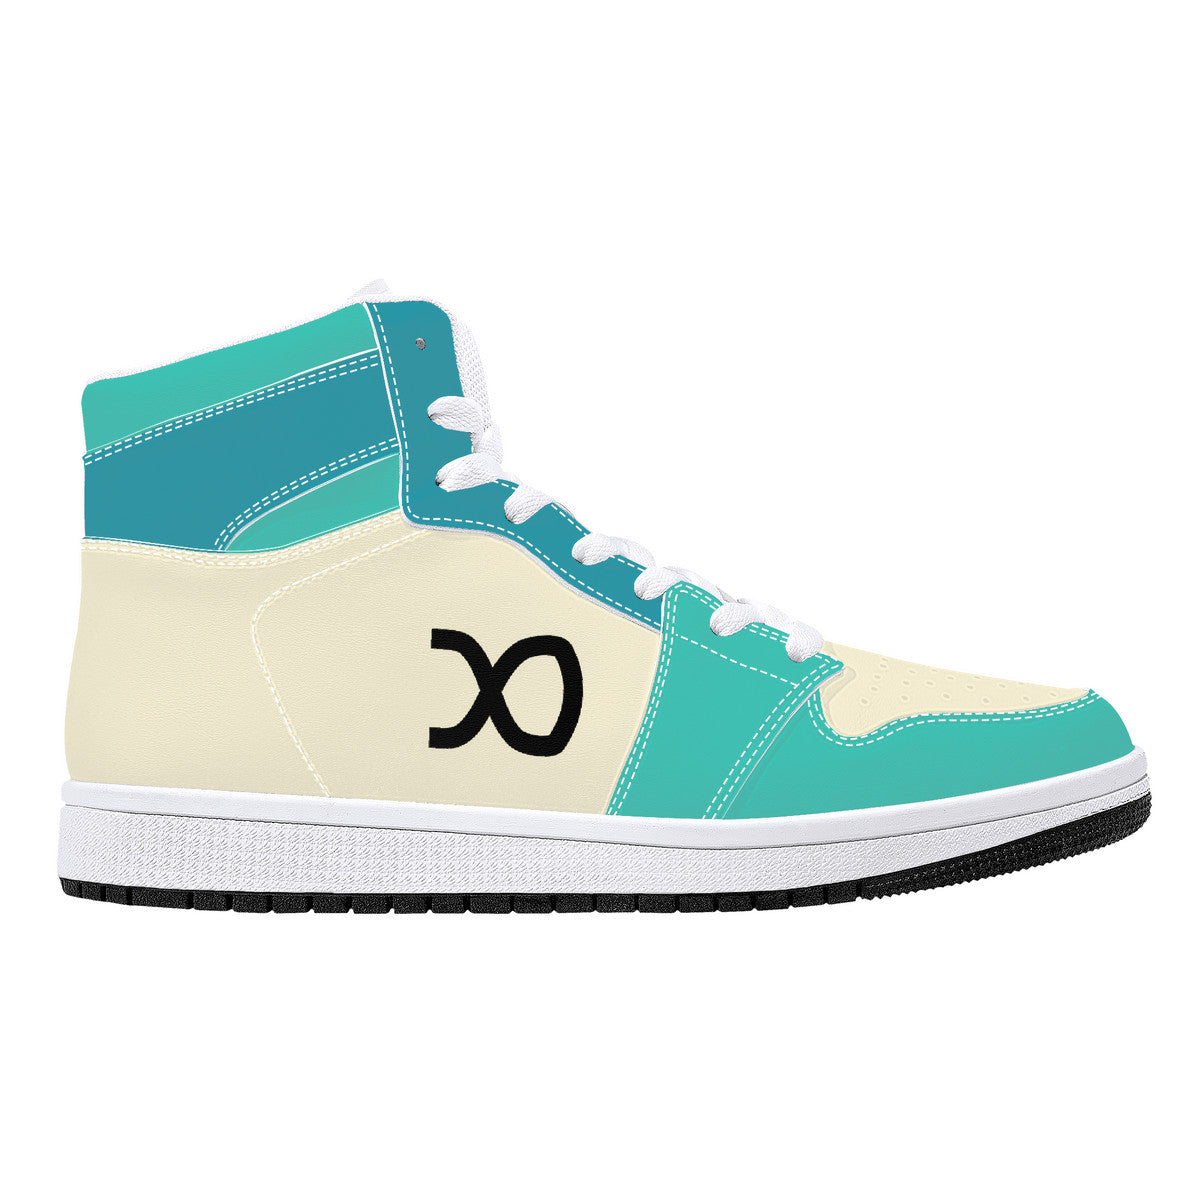 Cool shoes by Alex H | High Top Customized | Shoe Zero